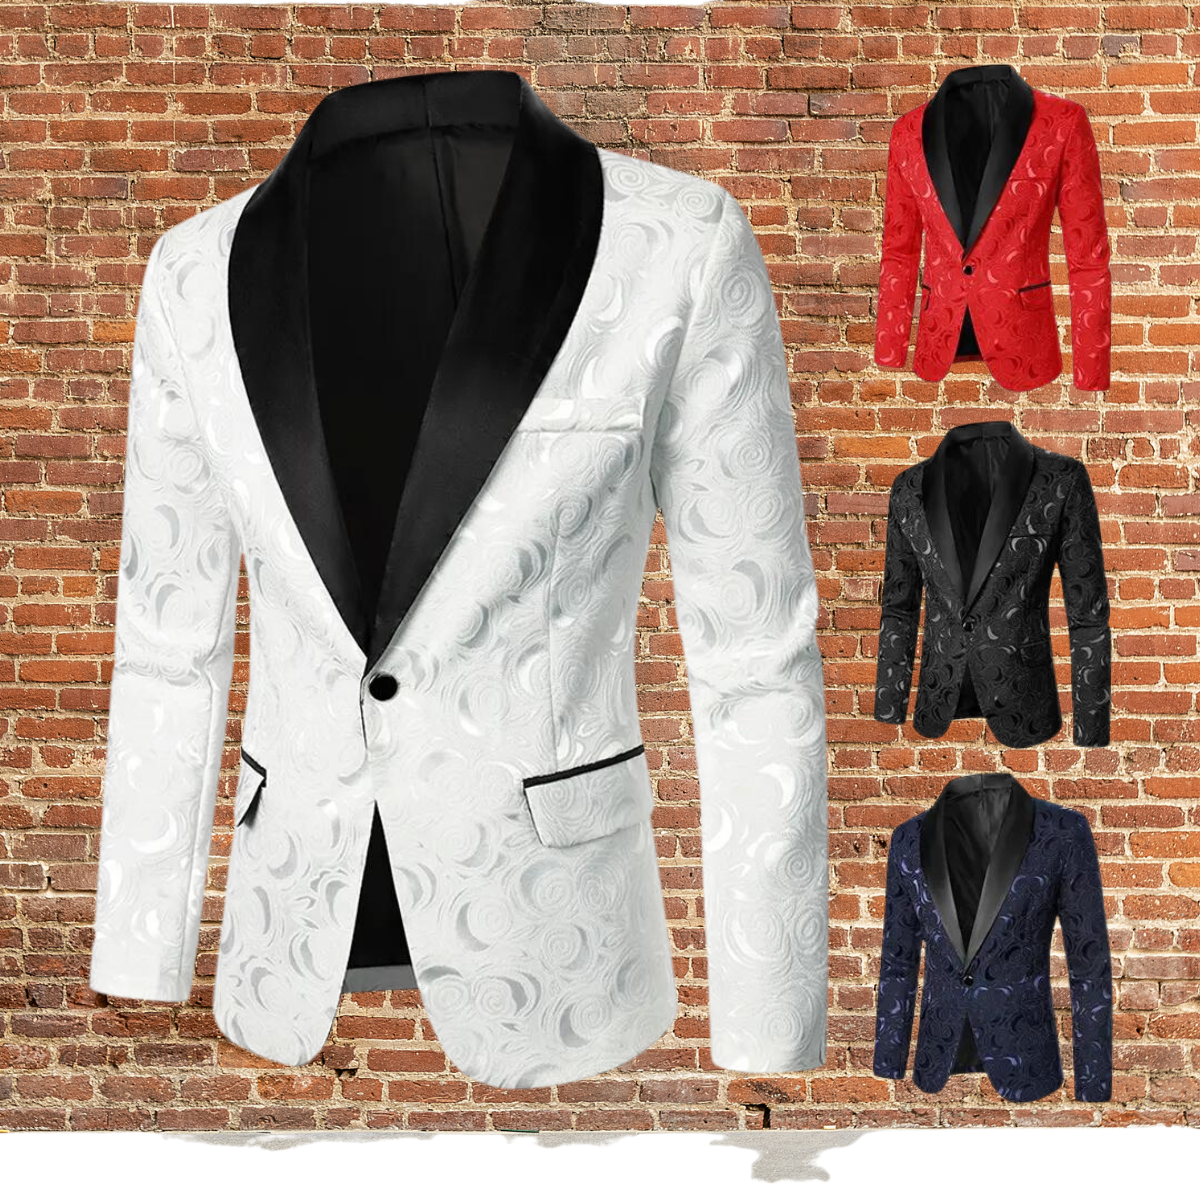 Men's casual fashion slim fit blazer, stylish streetwear with oversized zip hoodie and big watches2